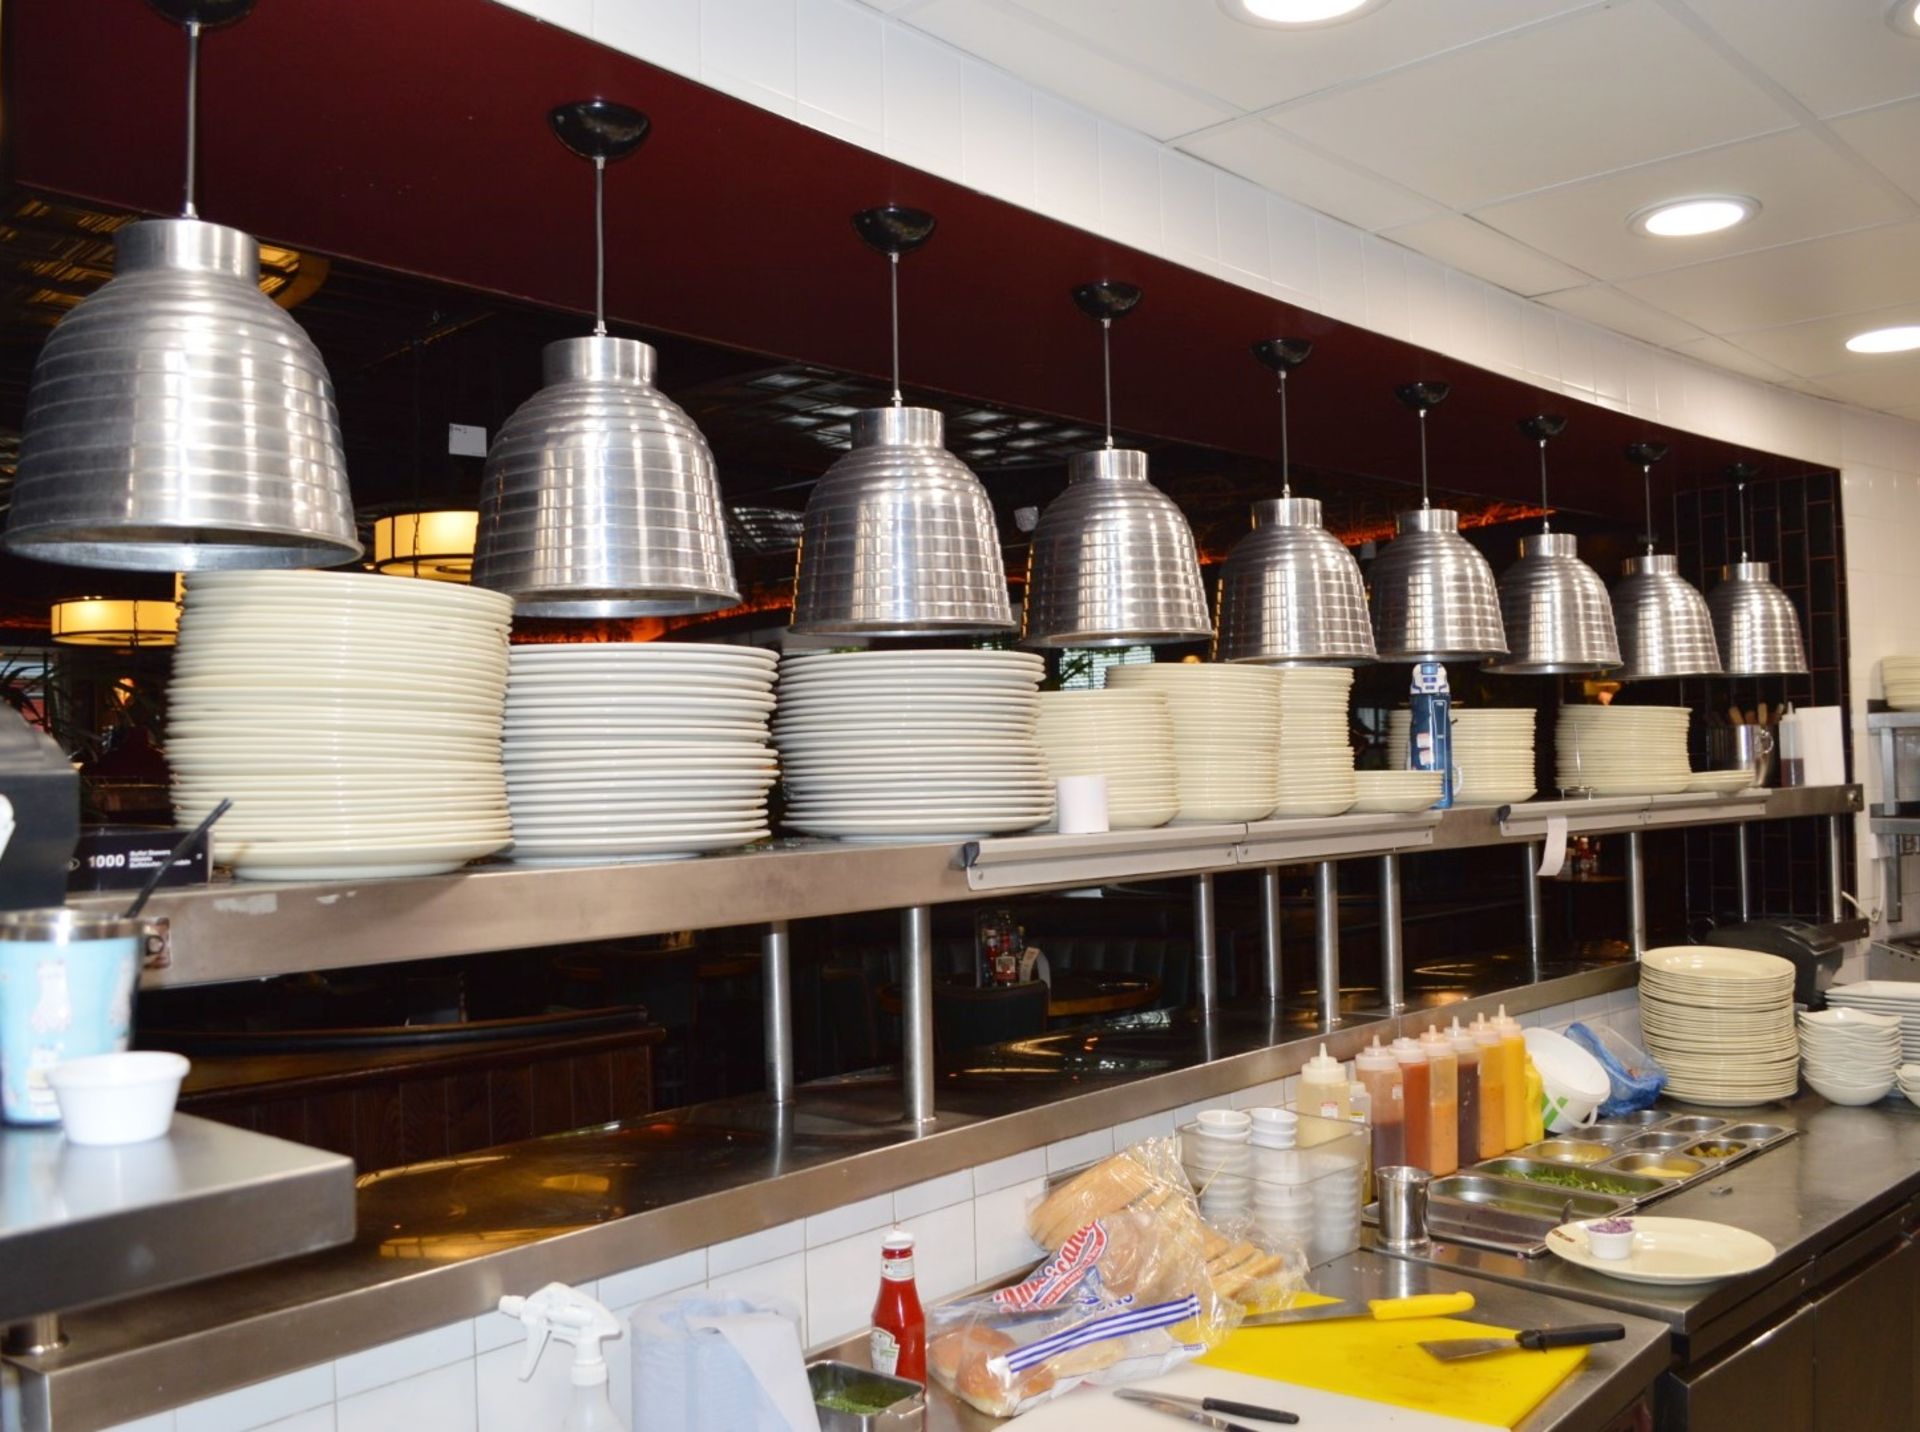 9 x Suspended Food Warming Lamps With Ribbed Chrome Design - CL390 - Location: Sheffield S9 This lot